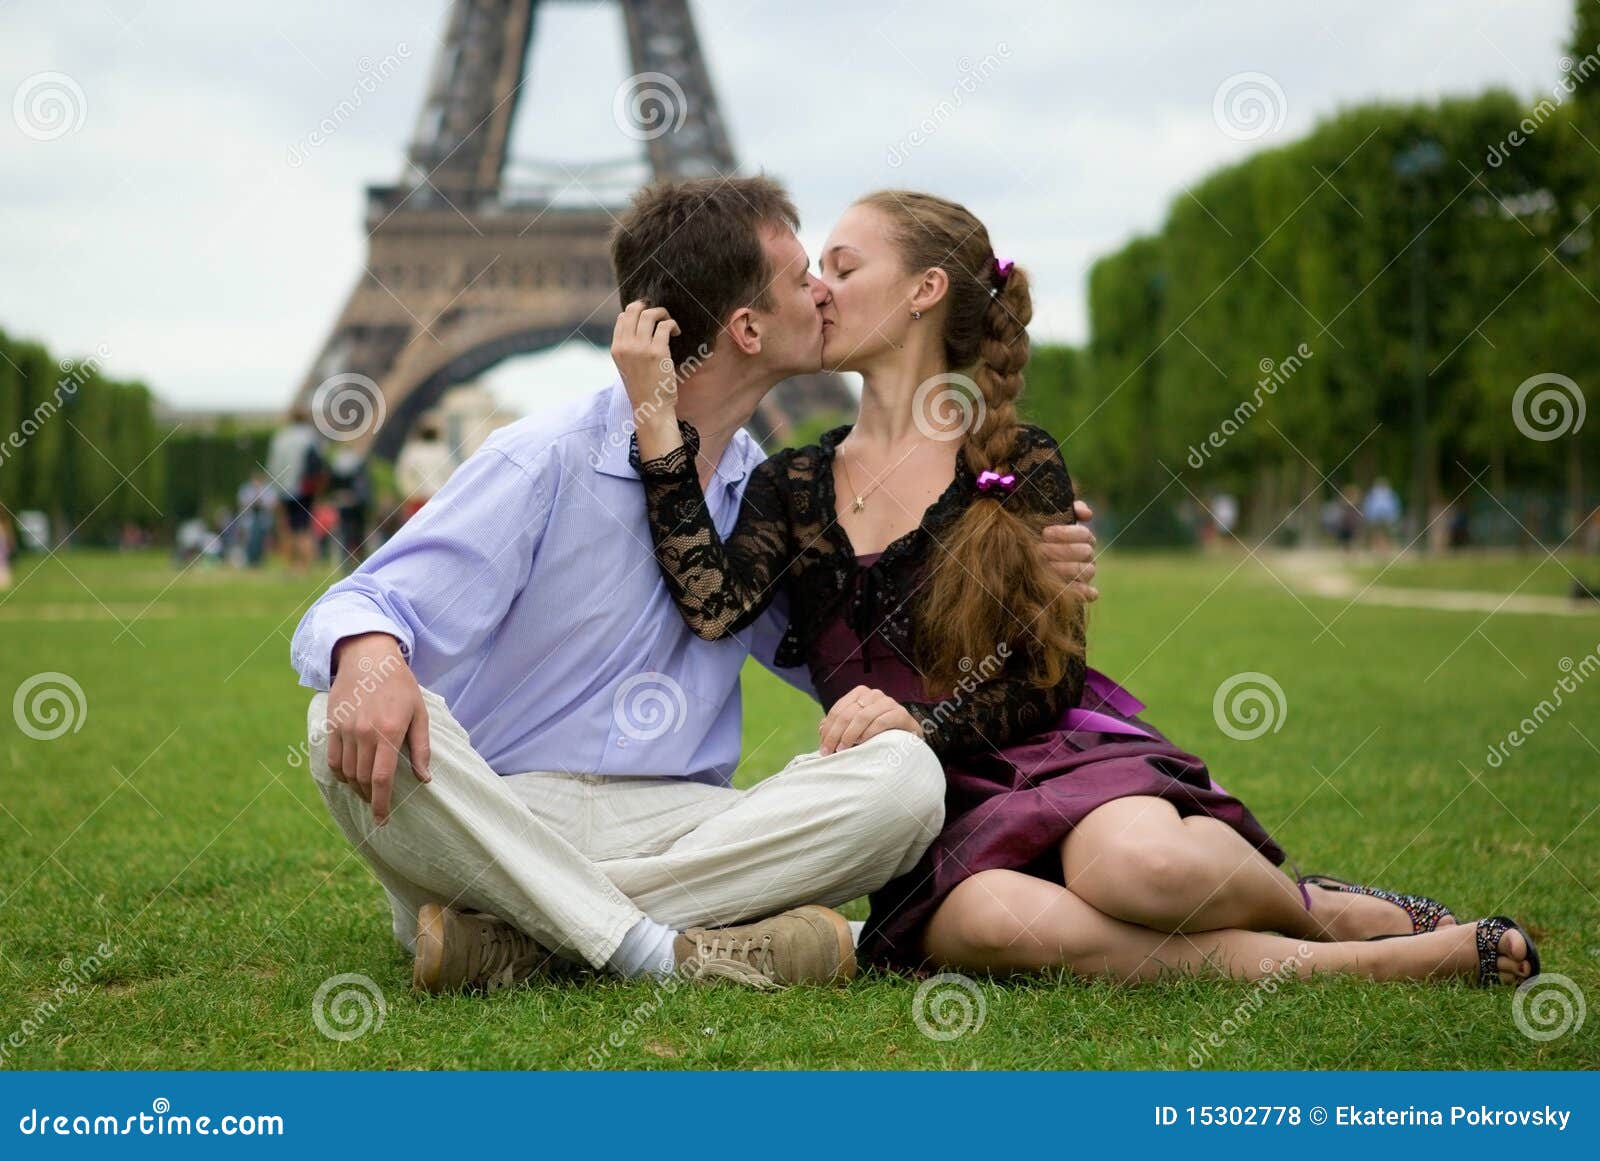 Romantic Couple in Paris Kissing Stock Photo - Image of dress, french:  15302778